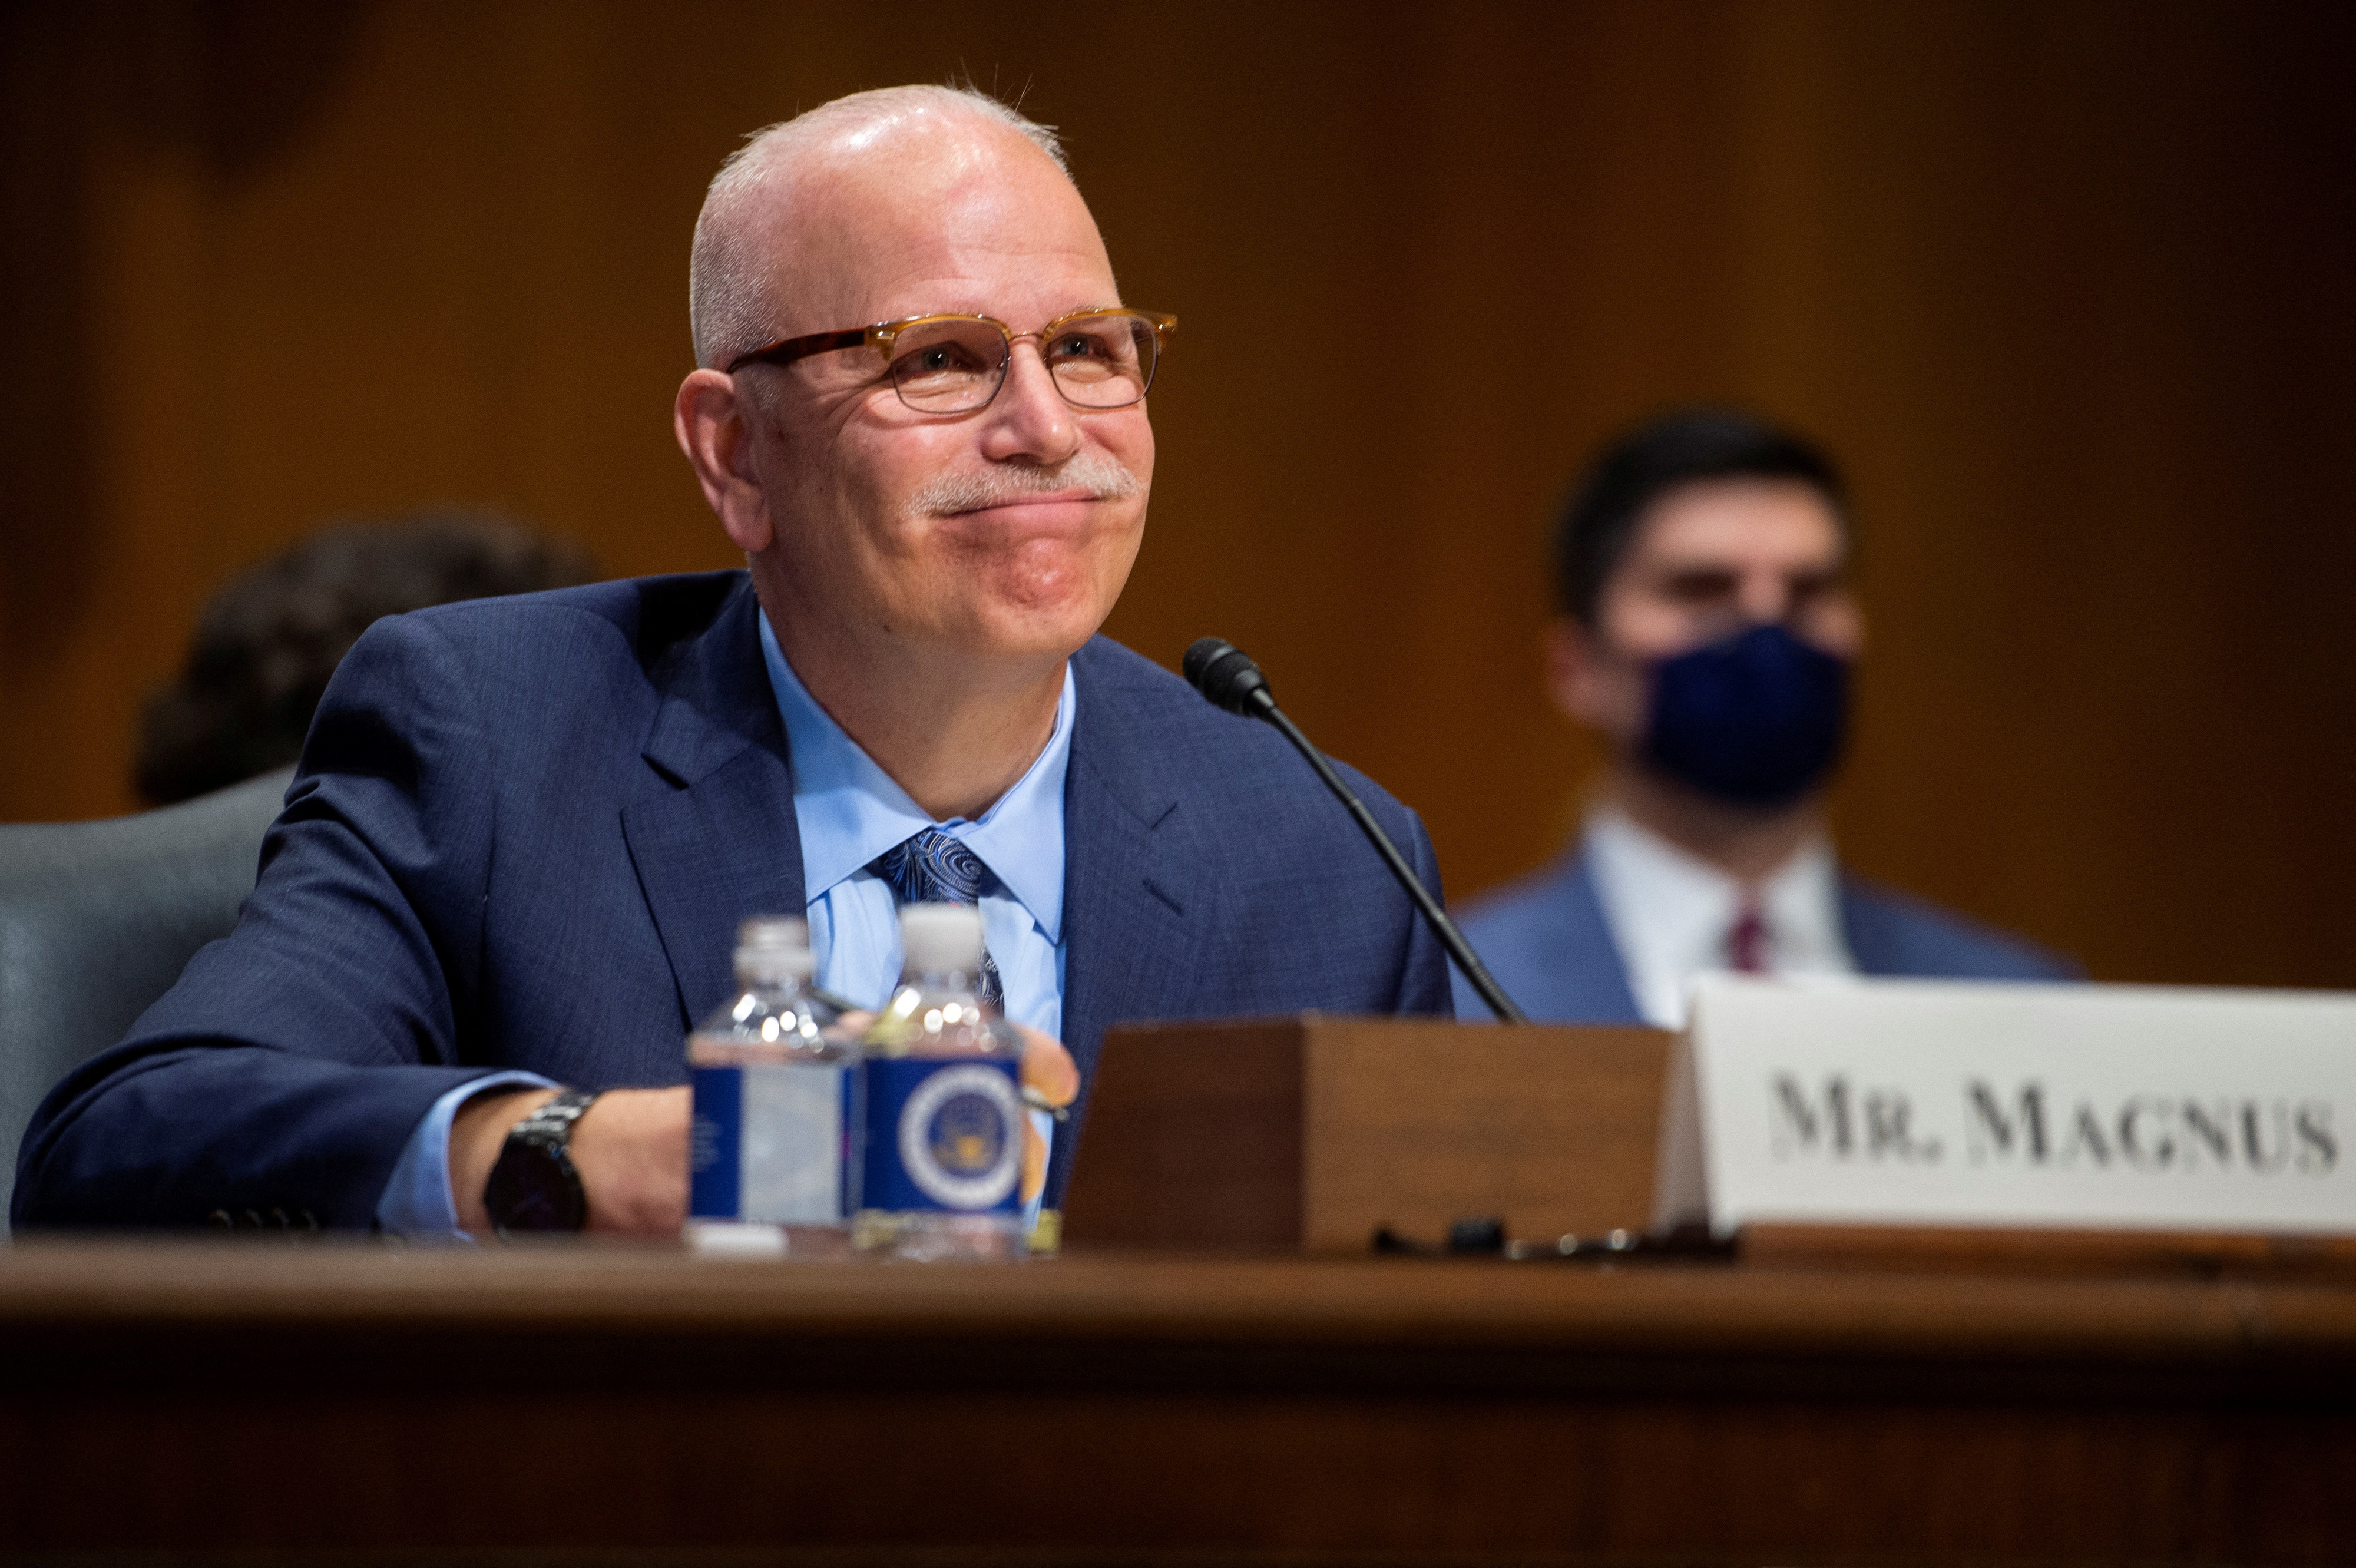 Senate Finance Committee hearing on the nomination of Chris Magnus to be the next U.S. Customs and Border Protection commissioner